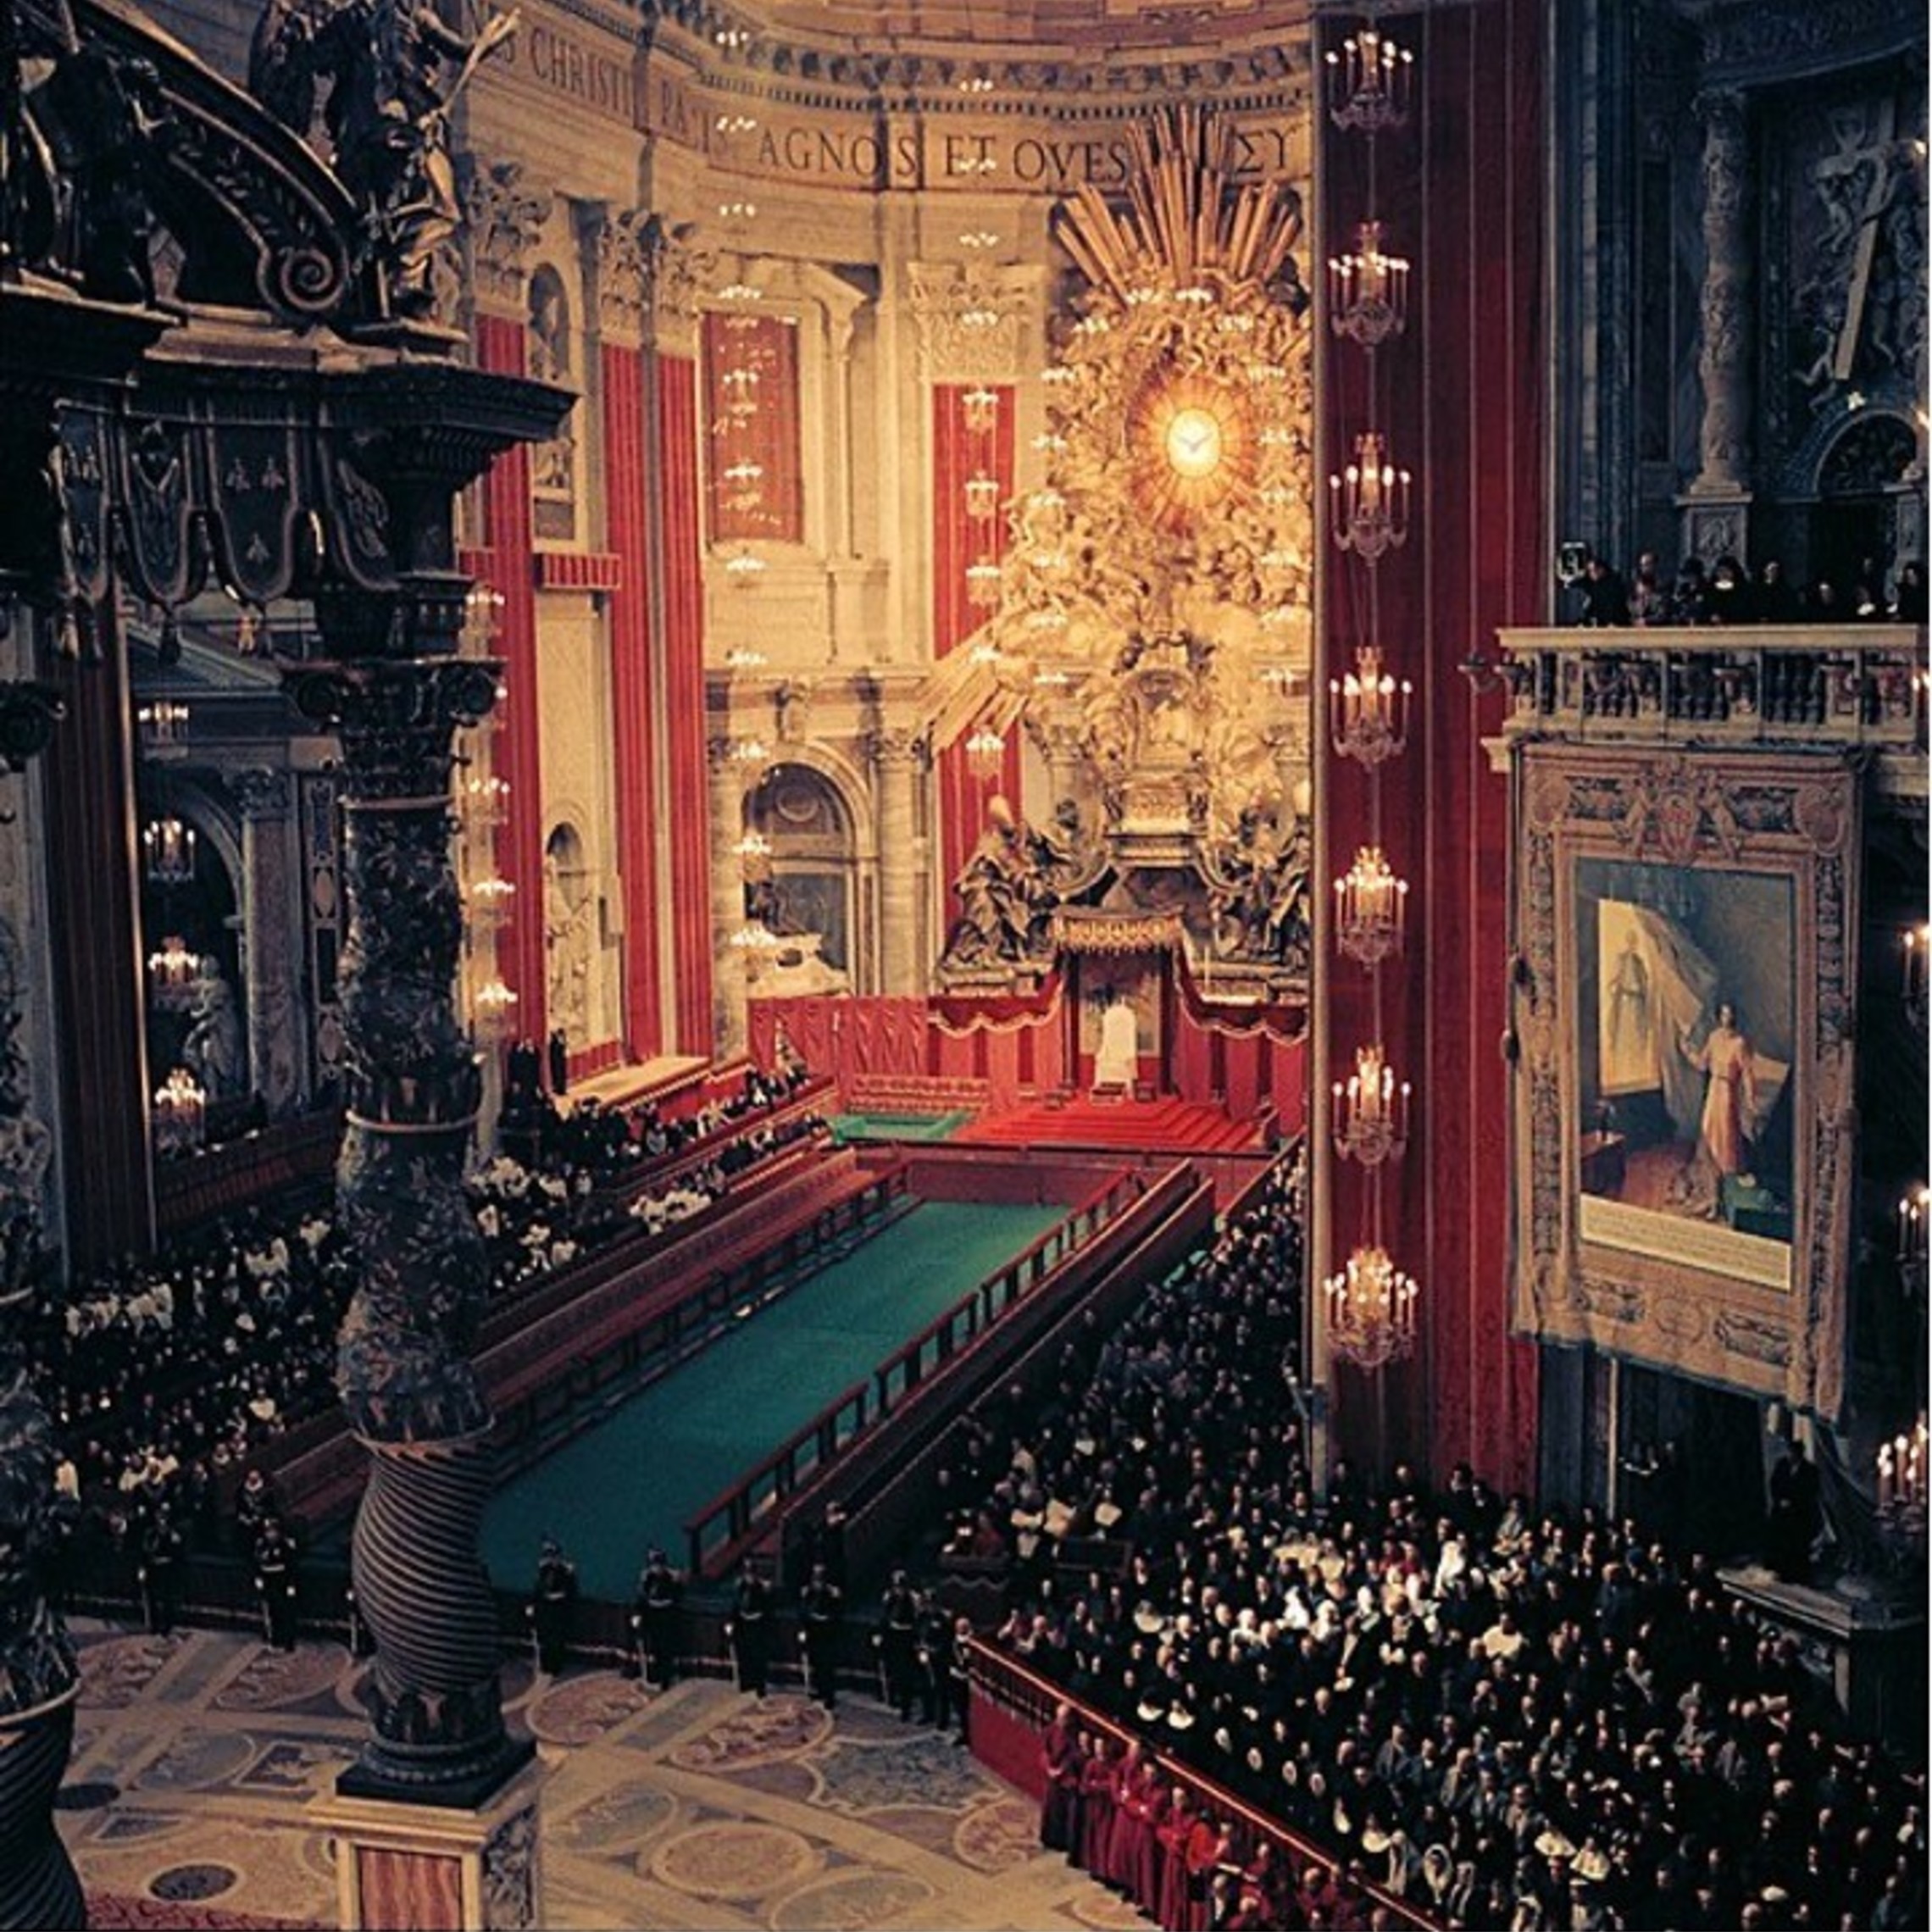 Vatican II by Lothar Wolleh, CC BY-SA 3.0 <https://creativecommons.org/licenses/by-sa/3.0>, via Wikimedia Commons